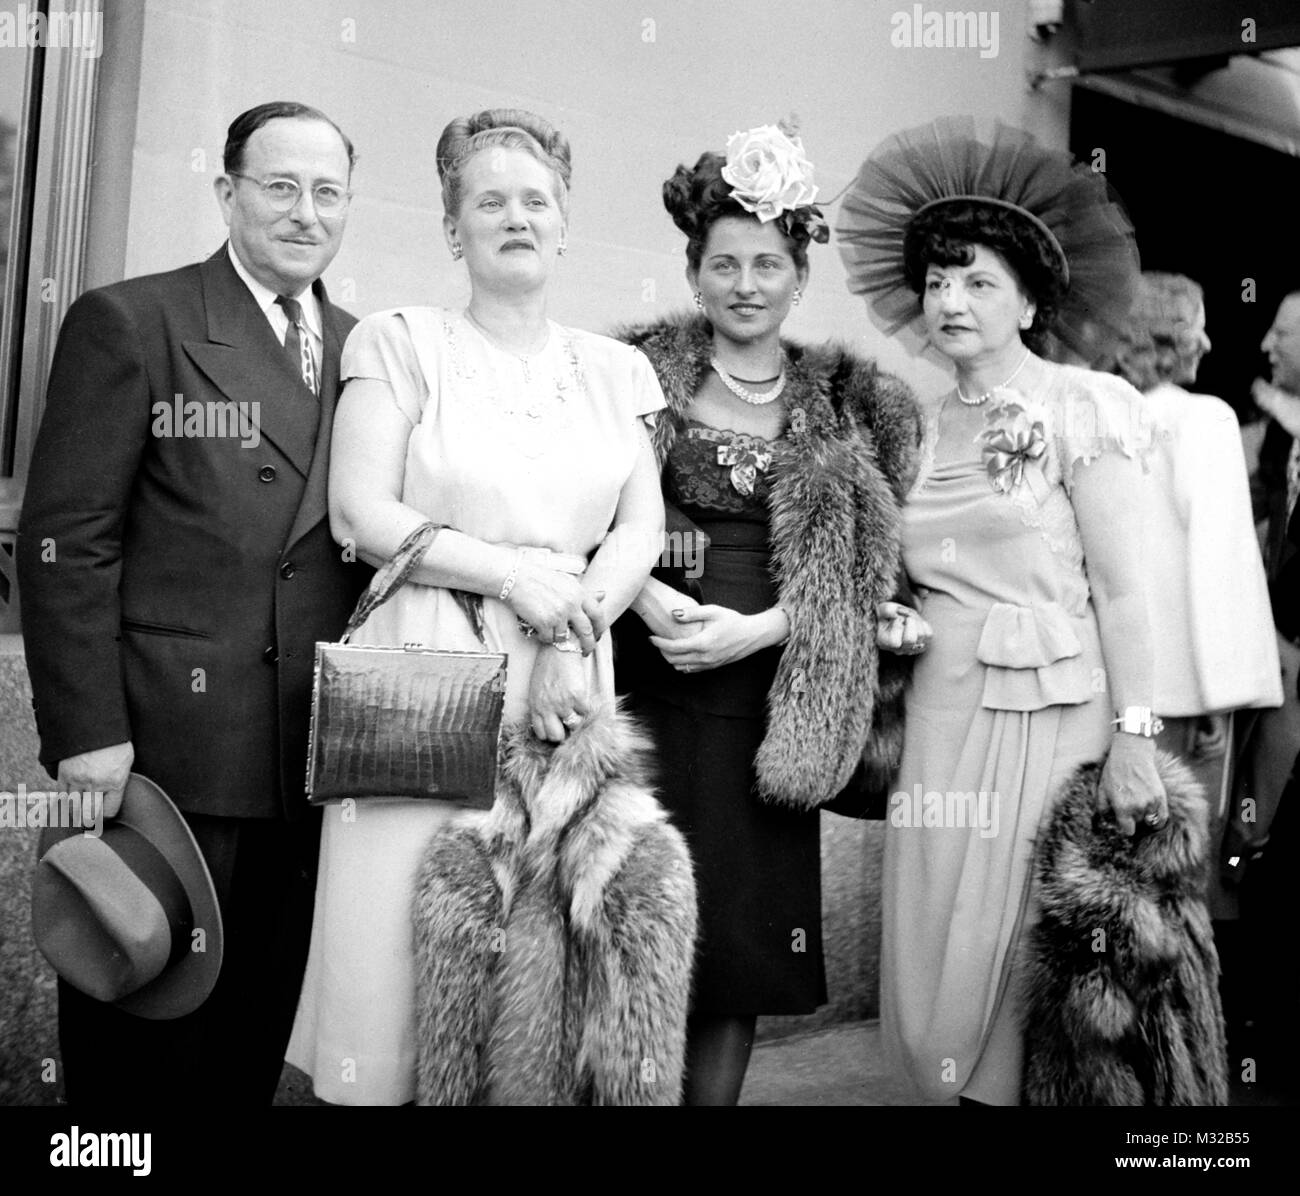 Fashionable quartet poses before entering a society event in the U.S. , ca. 1928. Stock Photo